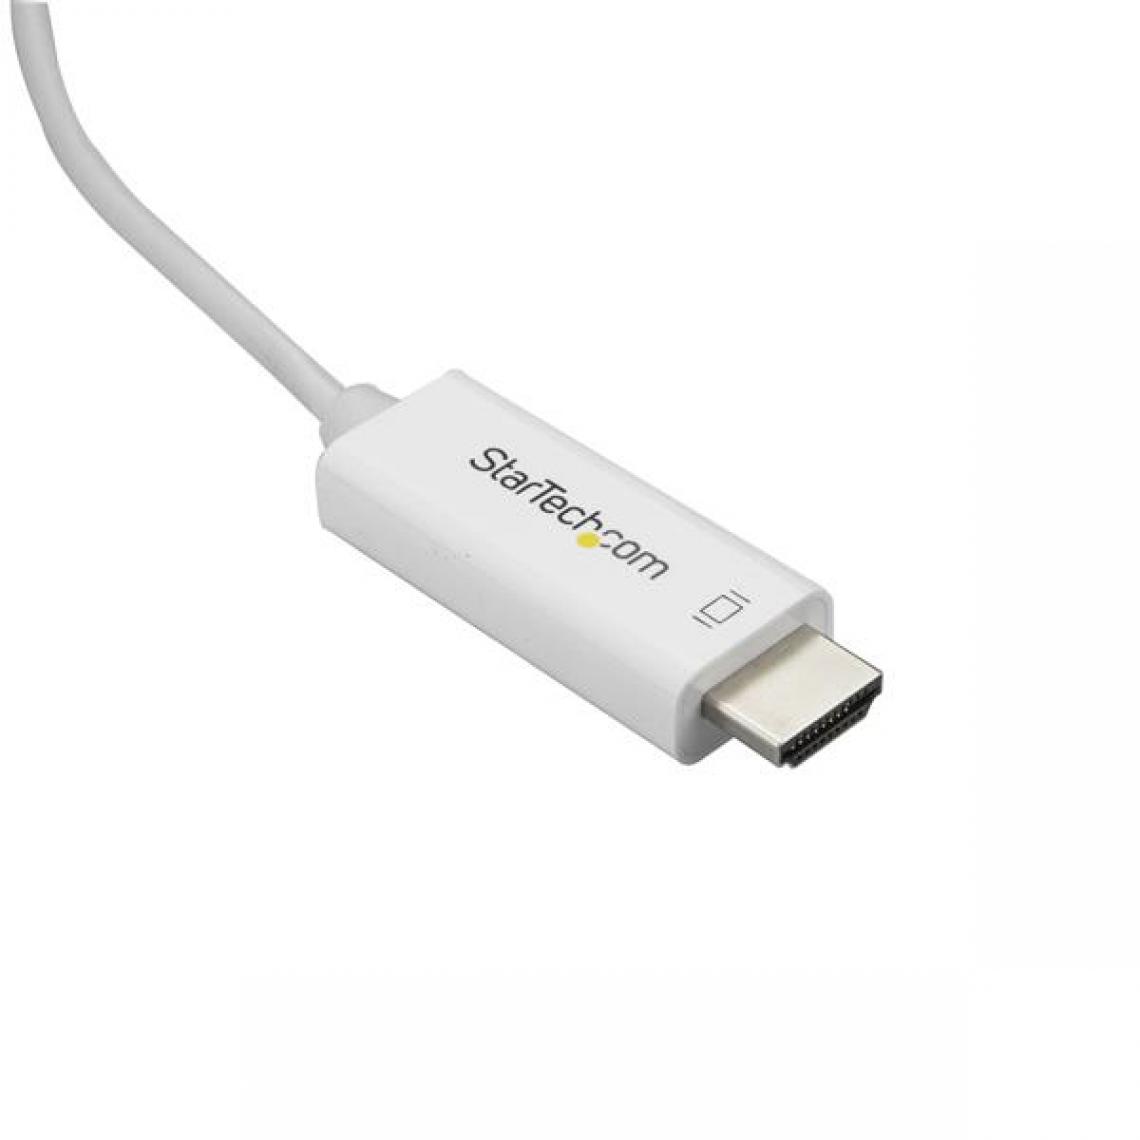 Startech - 2 M / 6FT USB C TO HDMI CABLE - Adaptateurs